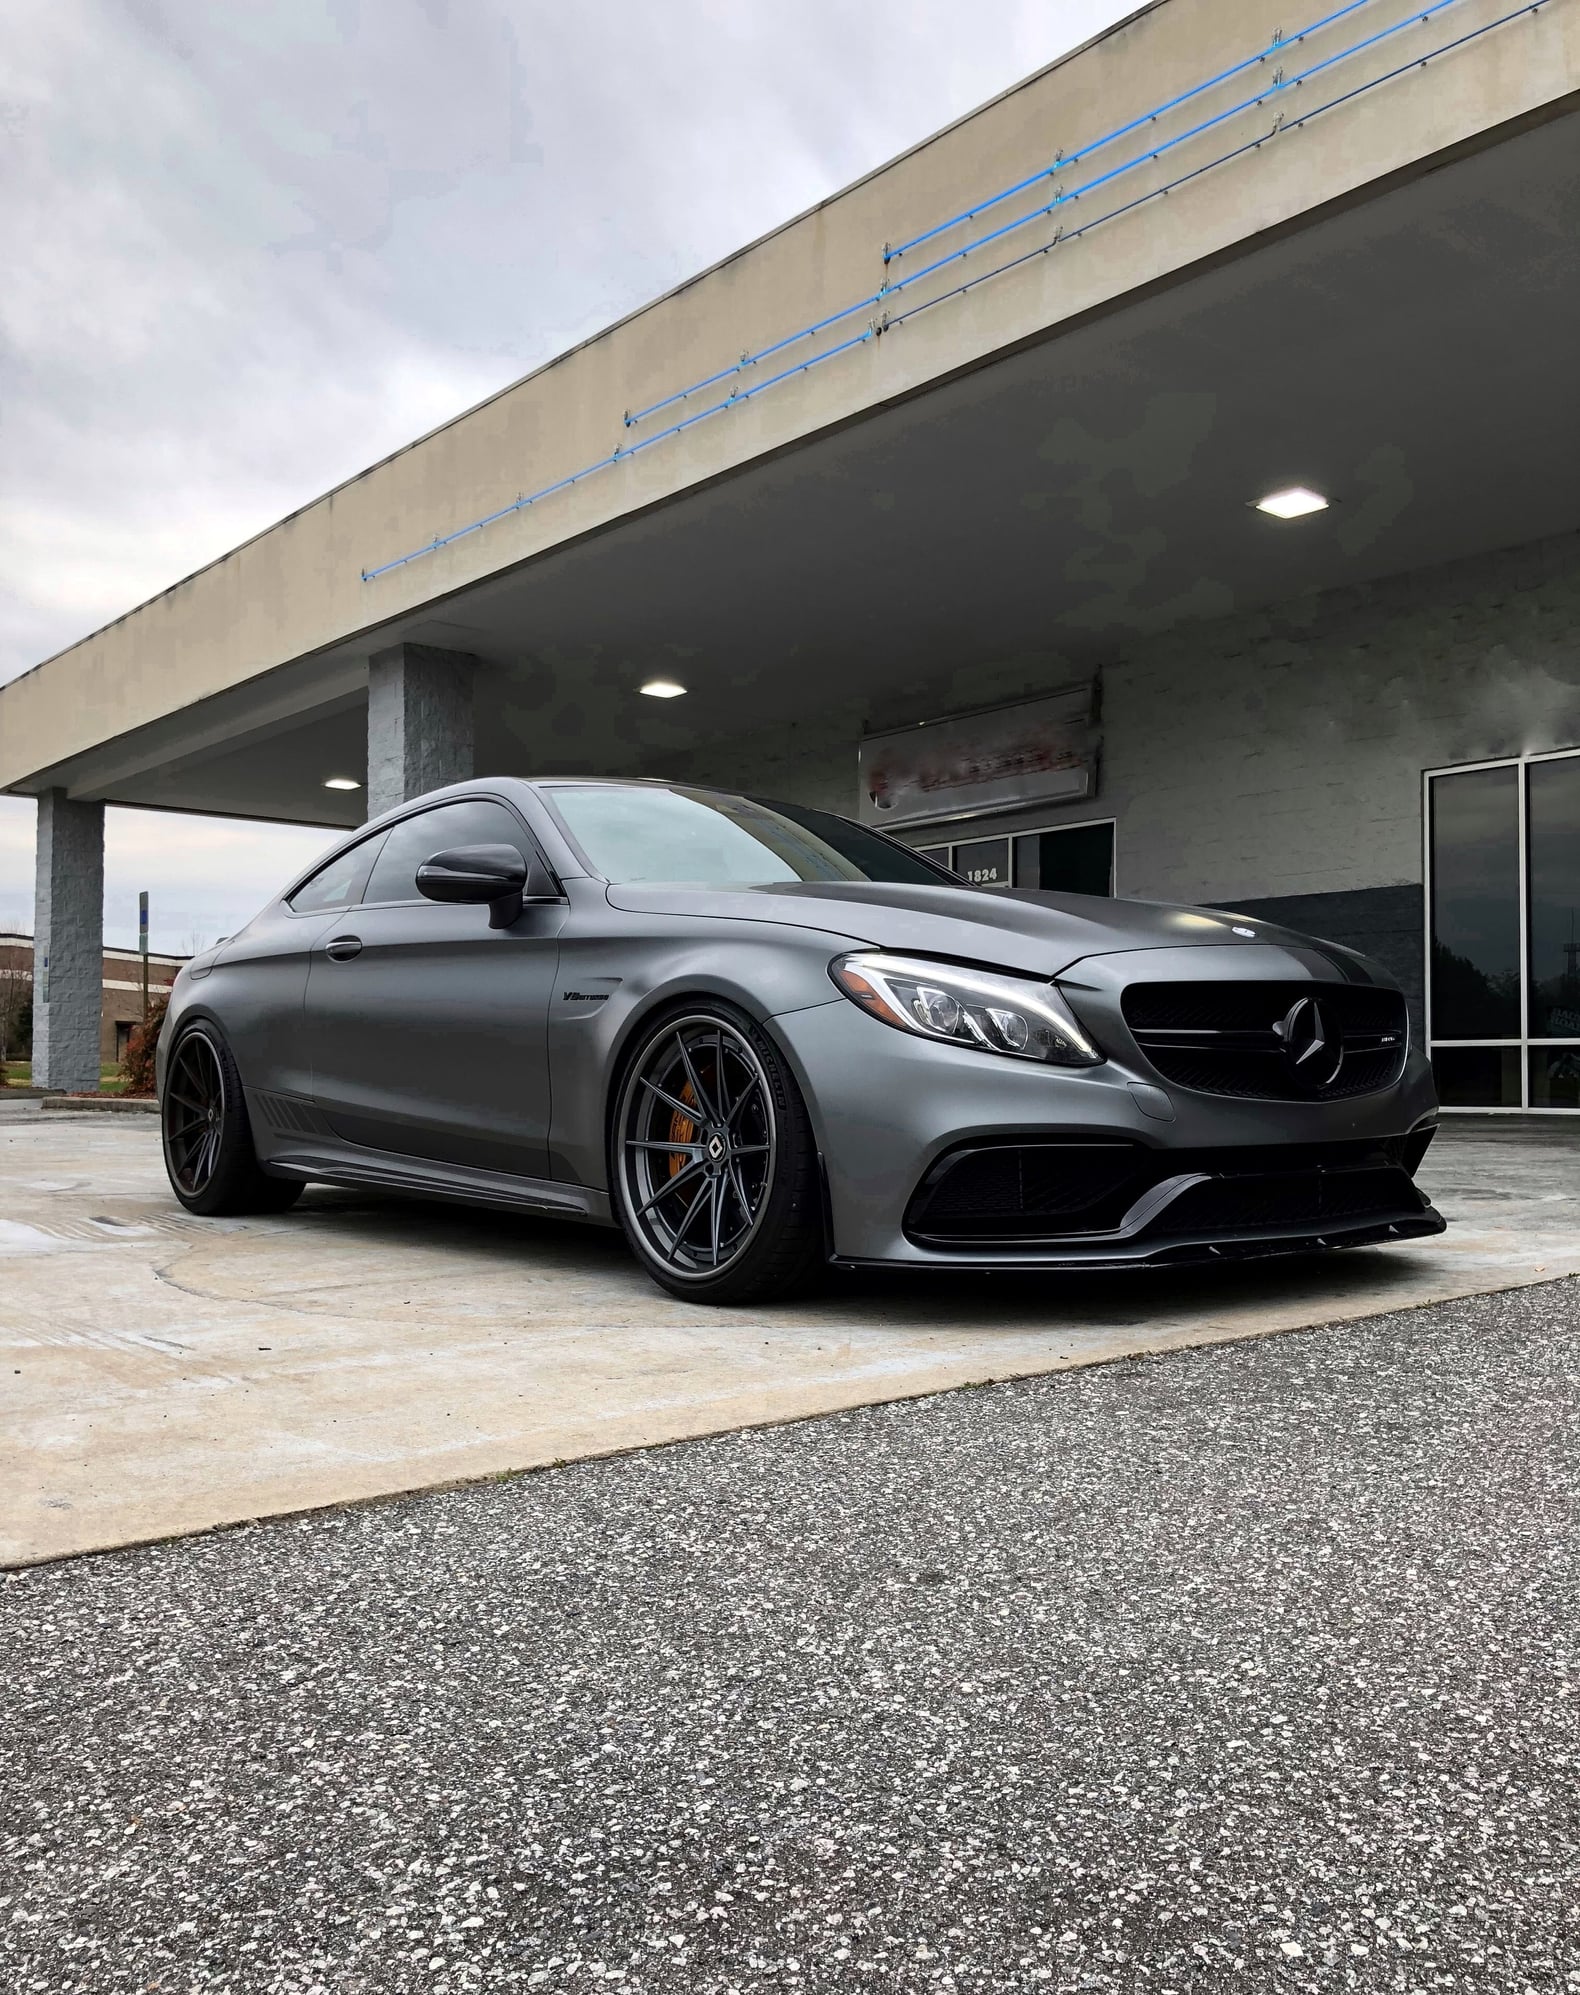 Wheels and Tires/Axles - Custom forged 3 piece Klassen wheels 20x10 20x11.5 - Used - 2017 to 2018 Mercedes-Benz C63 AMG S - Hickory, NC 28602, United States